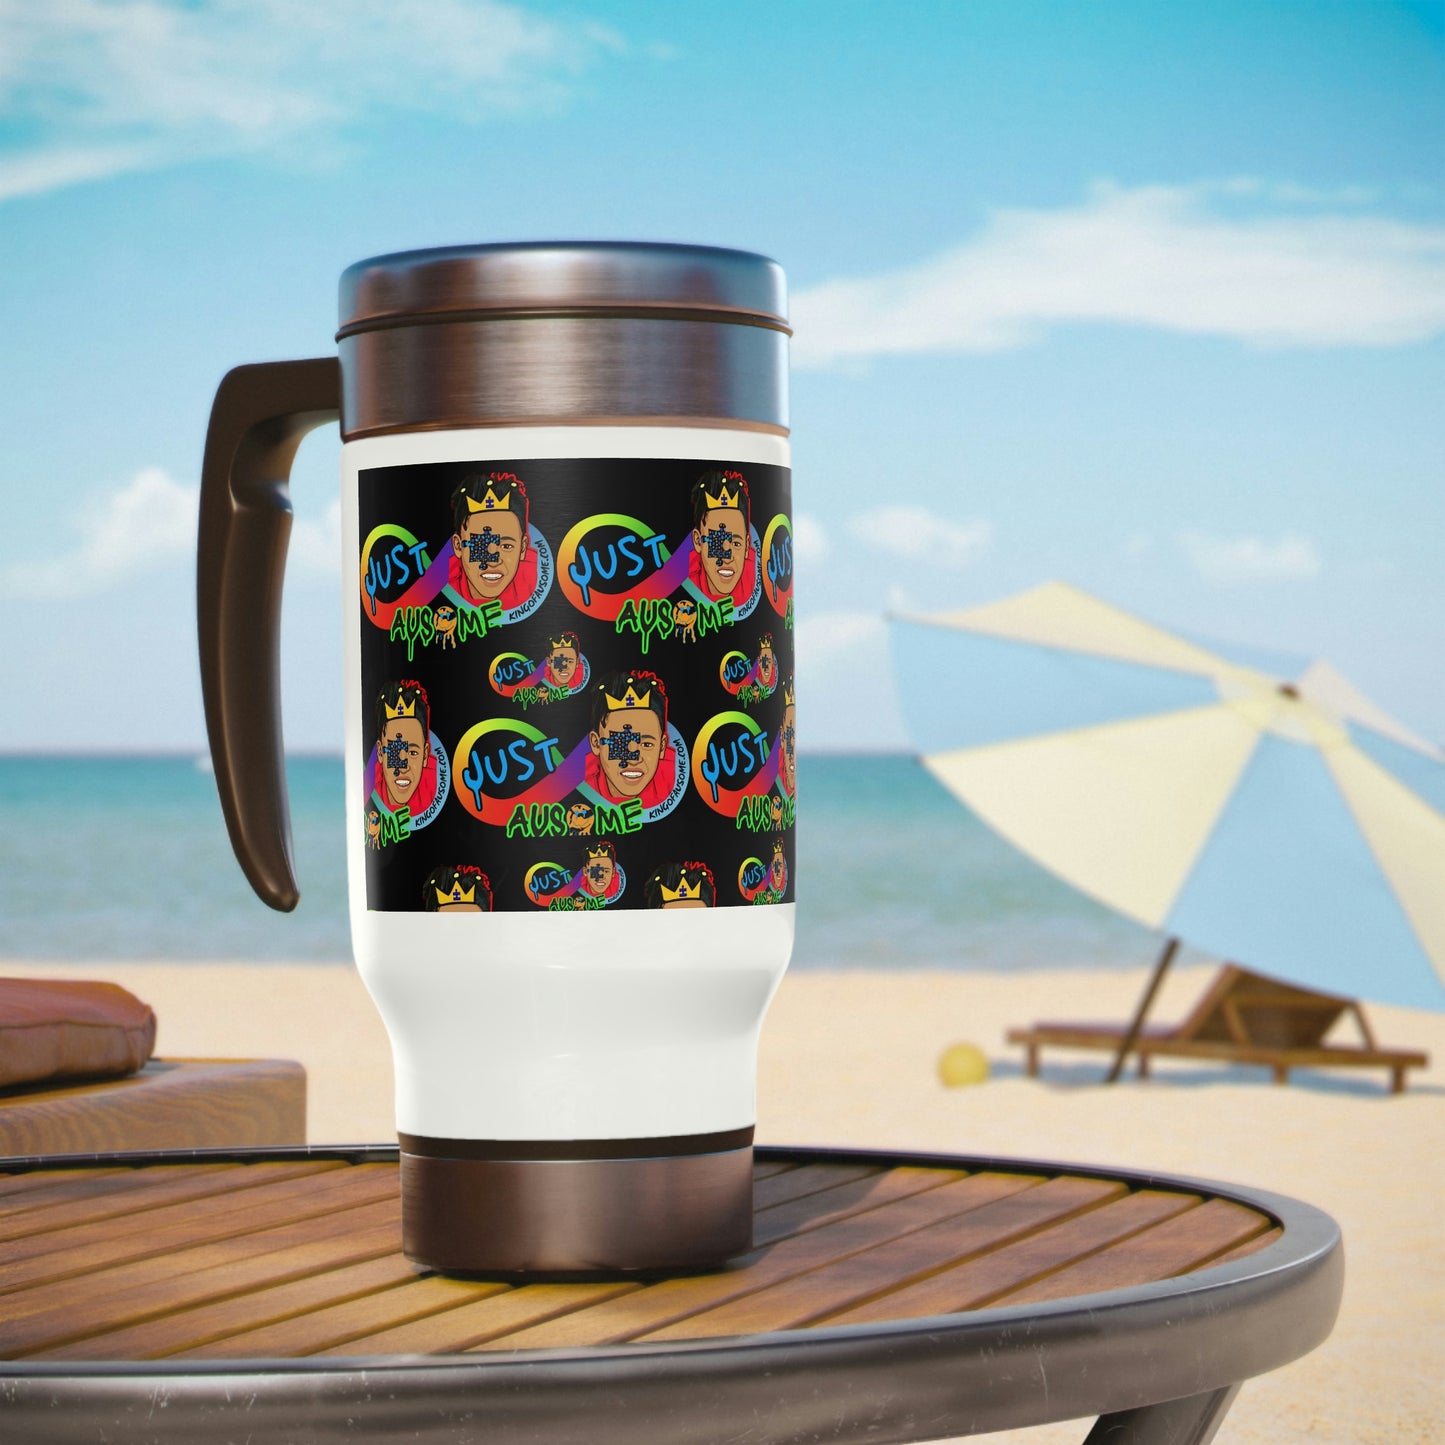 JUST AUSOME~Stainless Steel Travel Mug with Handle, 14oz